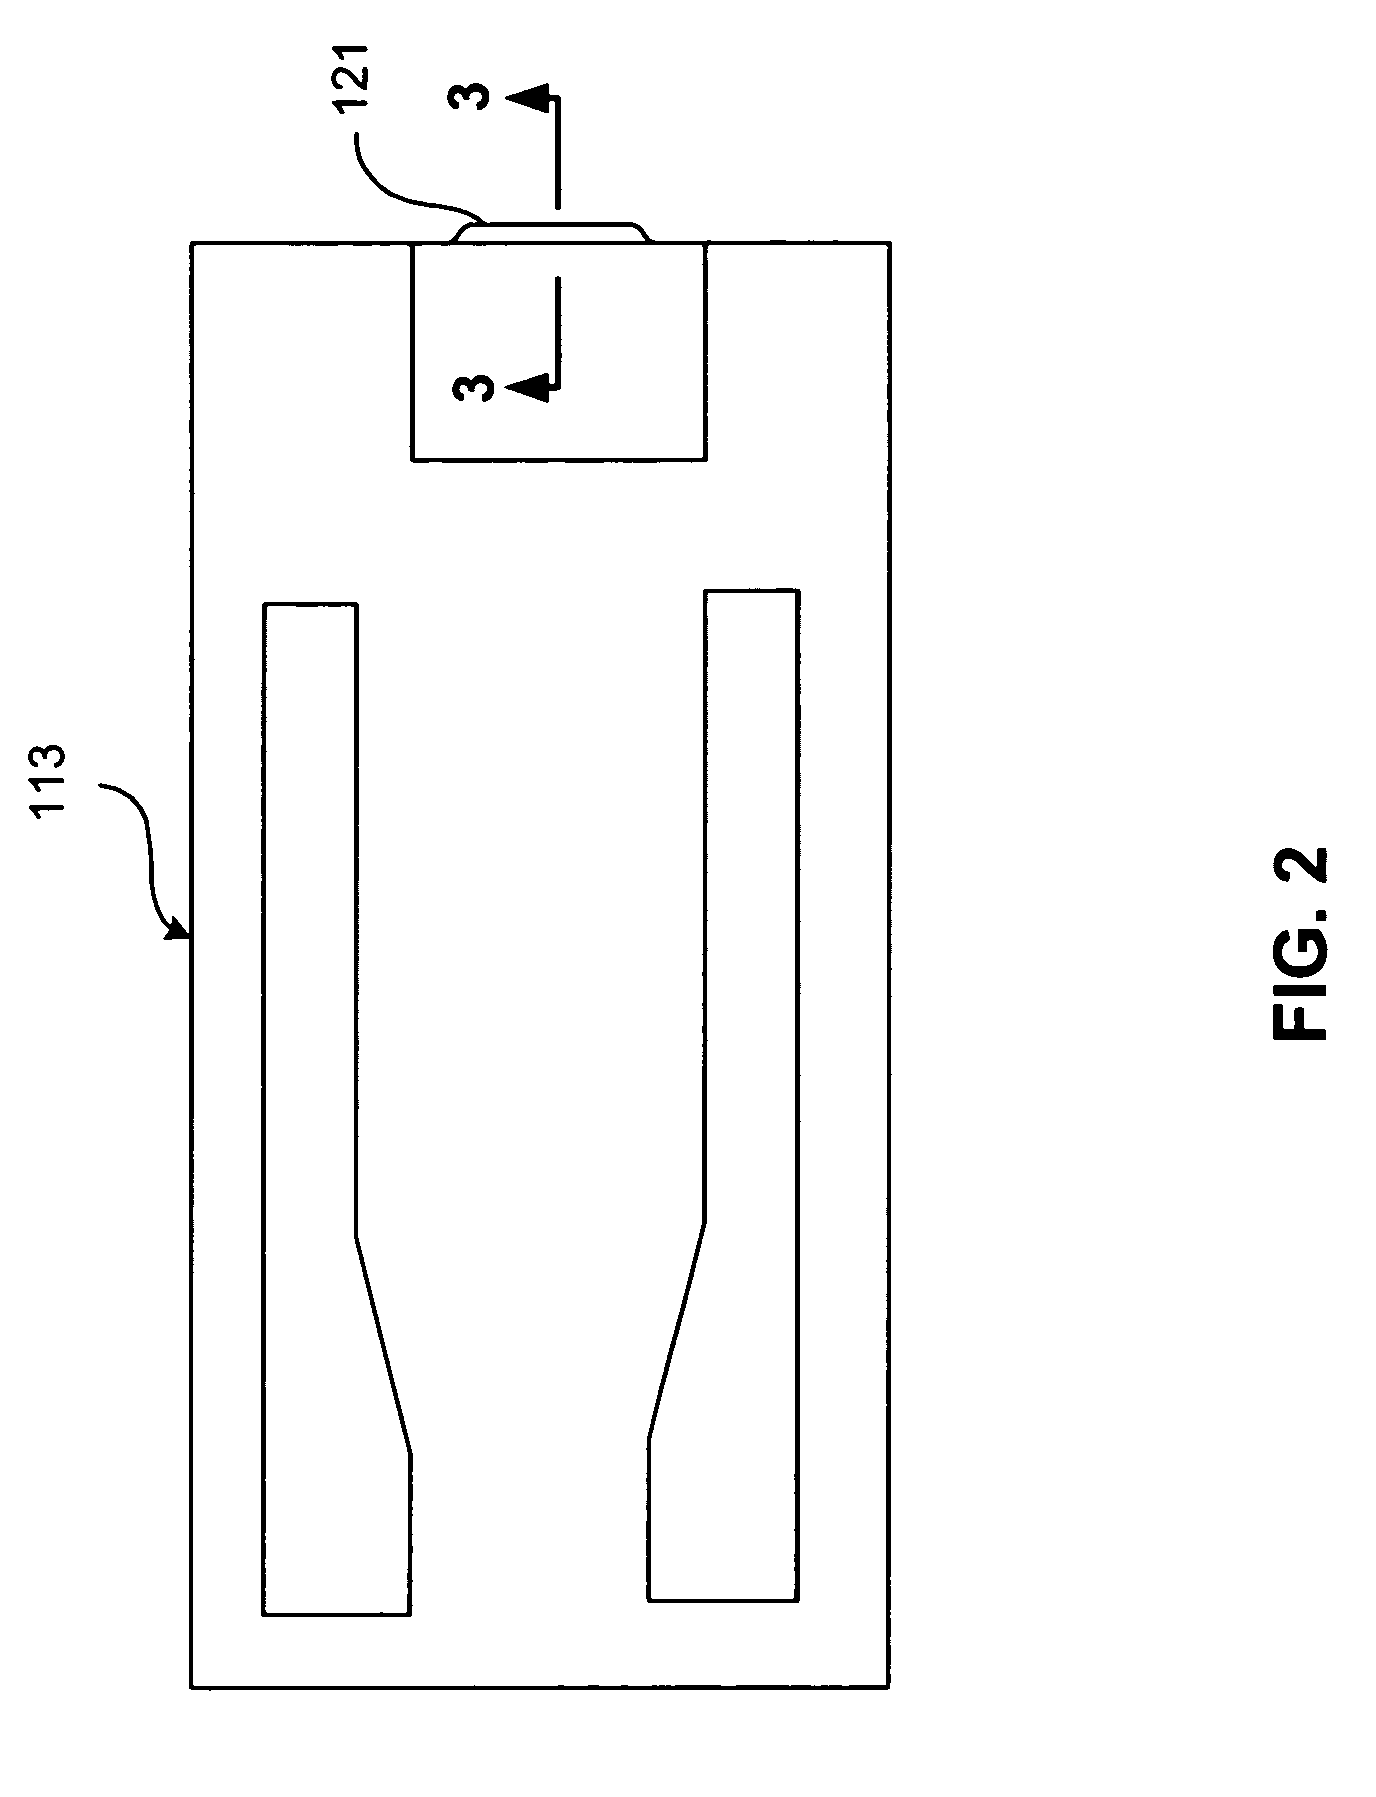 Current perpendicular to plane (CPP) magnetoresistive sensor having a flux guide structure and synthetic free layer